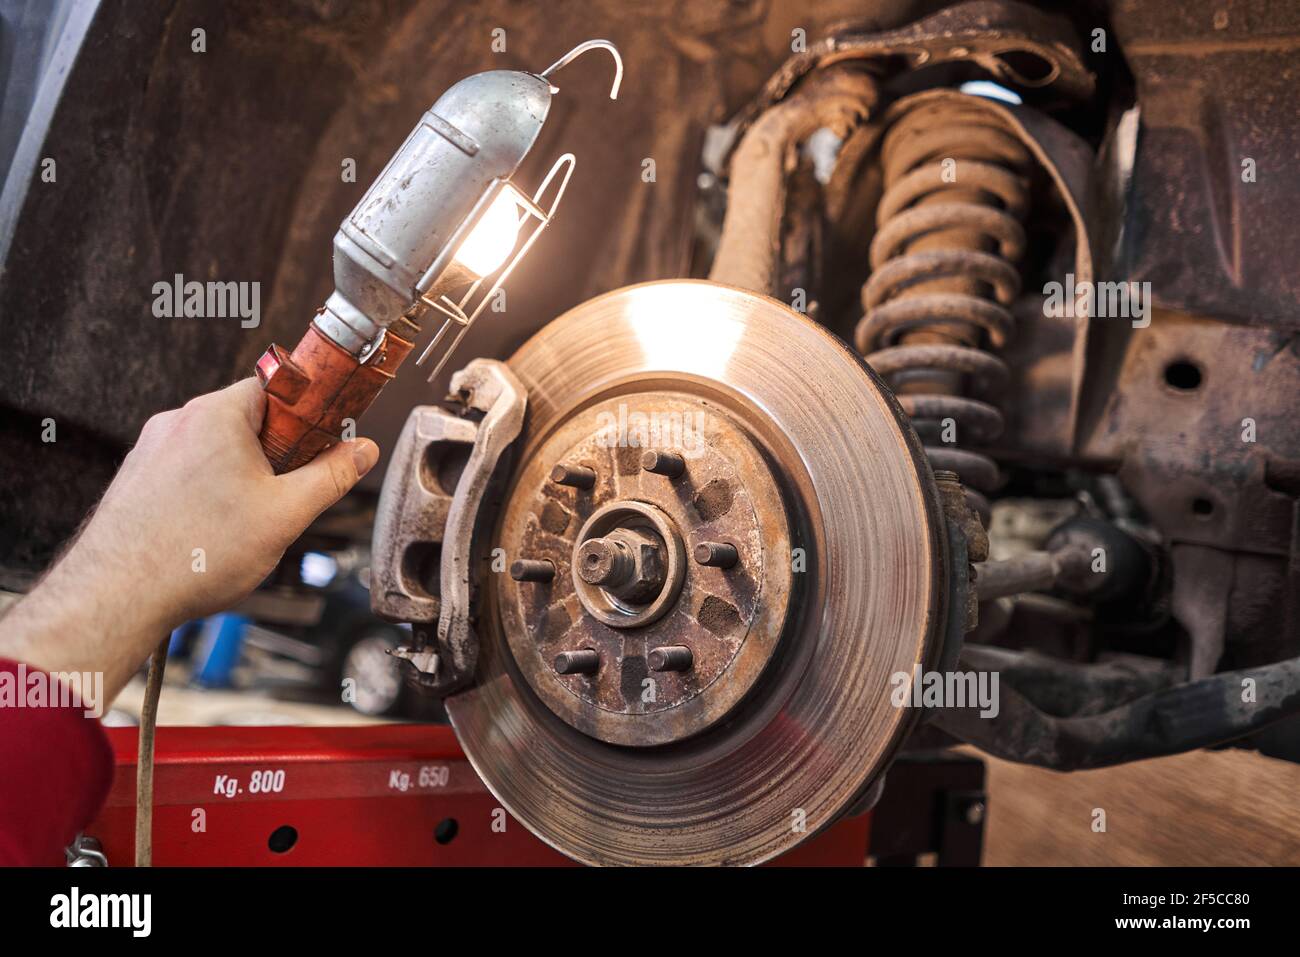 A car mechanic inspects brake discs and pads with a flashlight. Car on a repair stand. Technical service station for car. Stock Photo